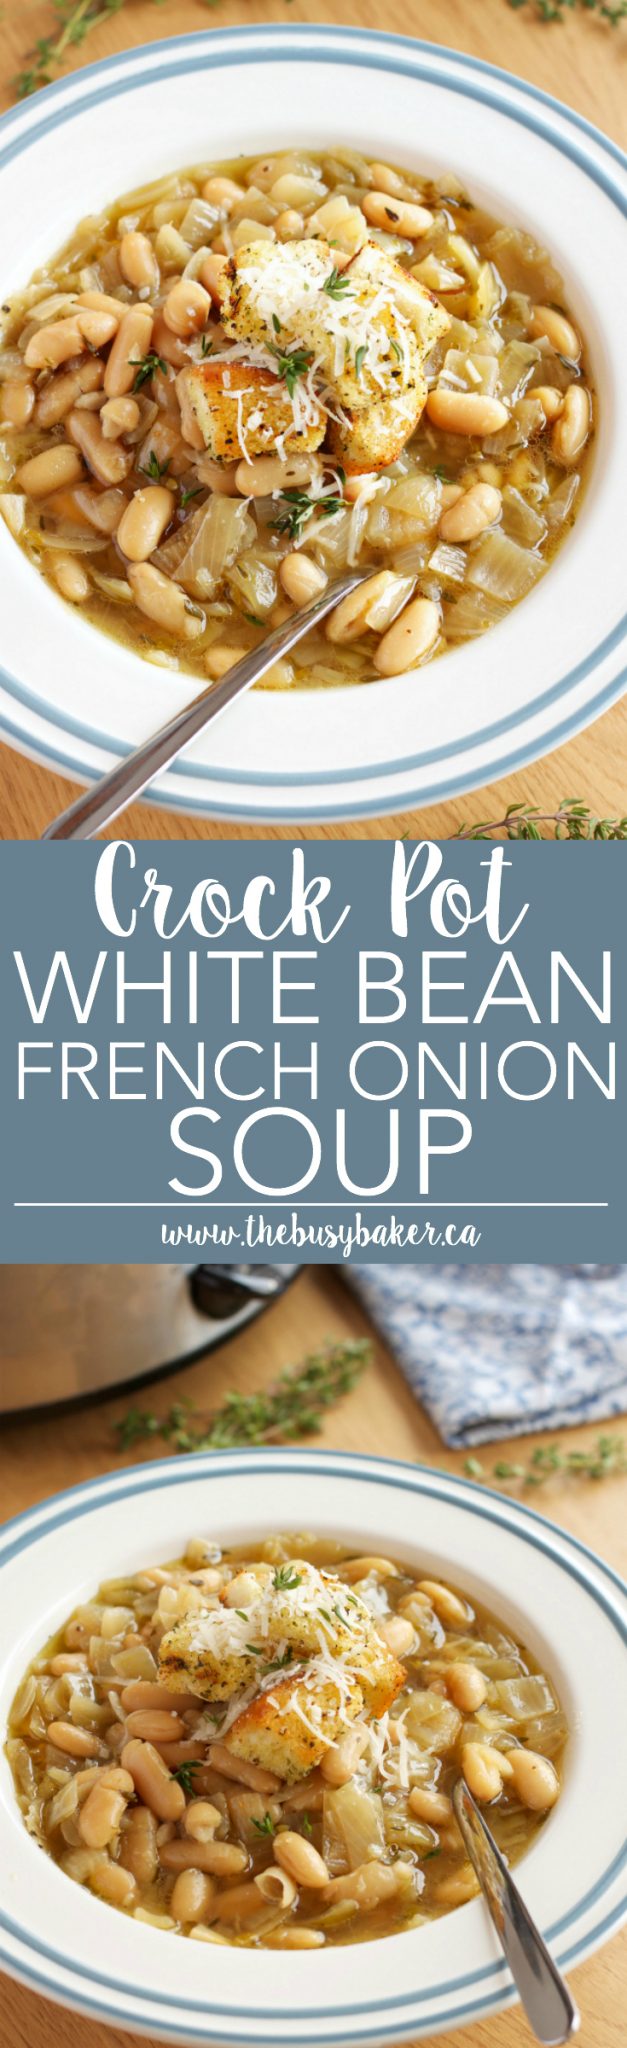 This Crock Pot White Bean French Onion Soup is a super easy twist on French Onion Soup that's vegetarian and made in the slow cooker! Recipe from thebusybaker.ca! via @busybakerblog